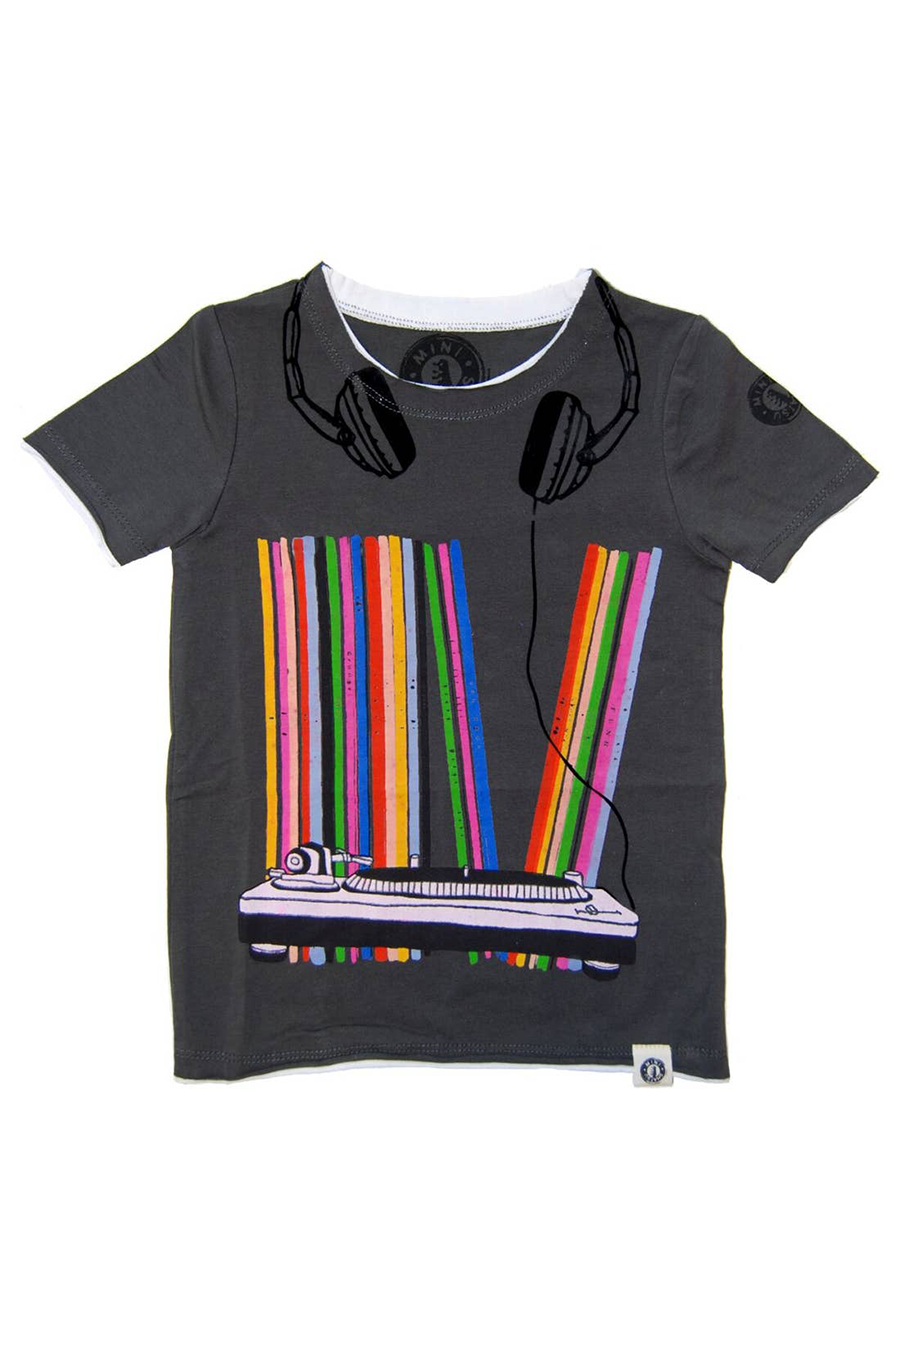 Vinyl Collection Kids Tee | Grey - Main Image Number 1 of 2